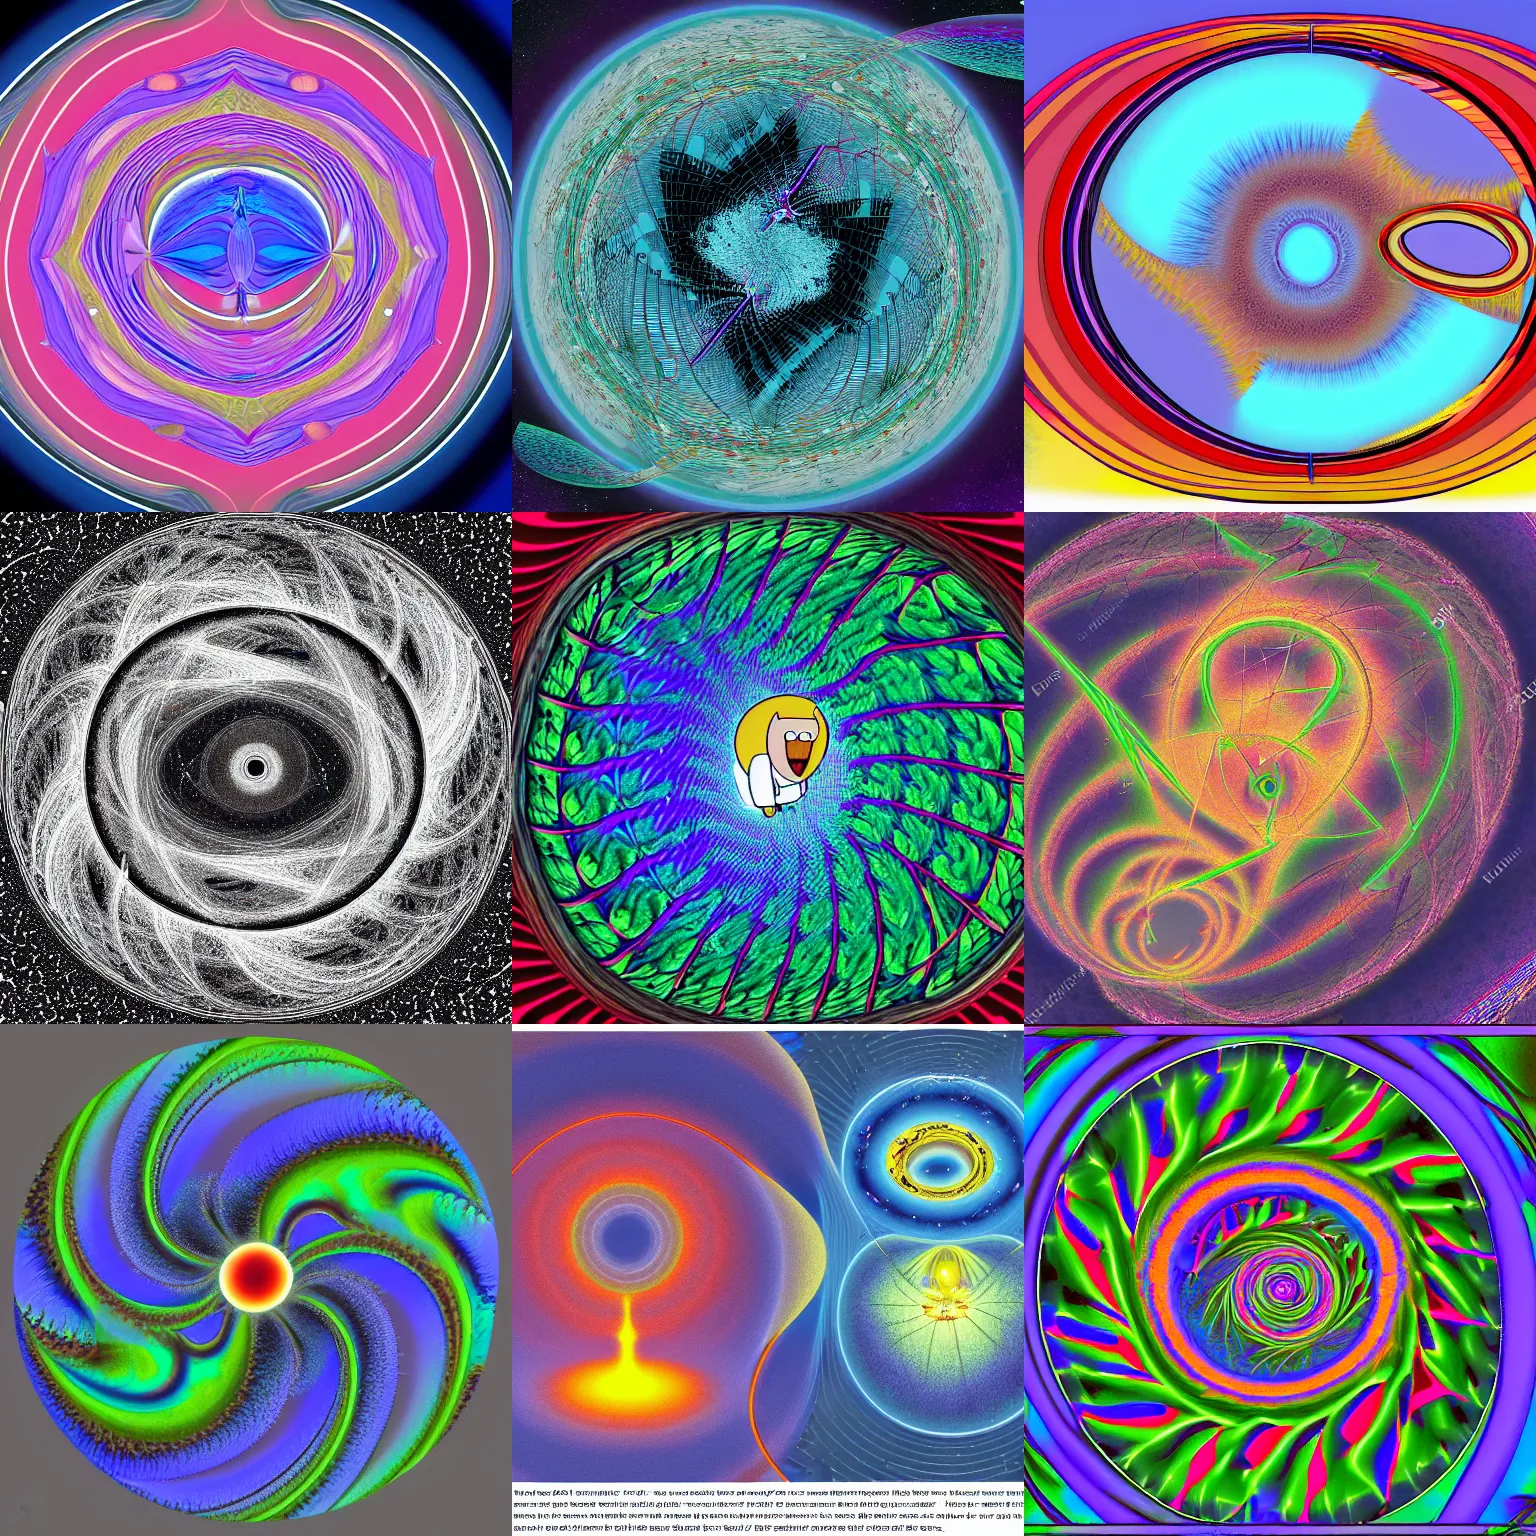 Prompt: a gravimetric shear in spacetime viewed through the fractal lens of adalasion monotronics influenced by the art stile of sir herbert mazelfritz in the early romantic period, in the world of adventure time